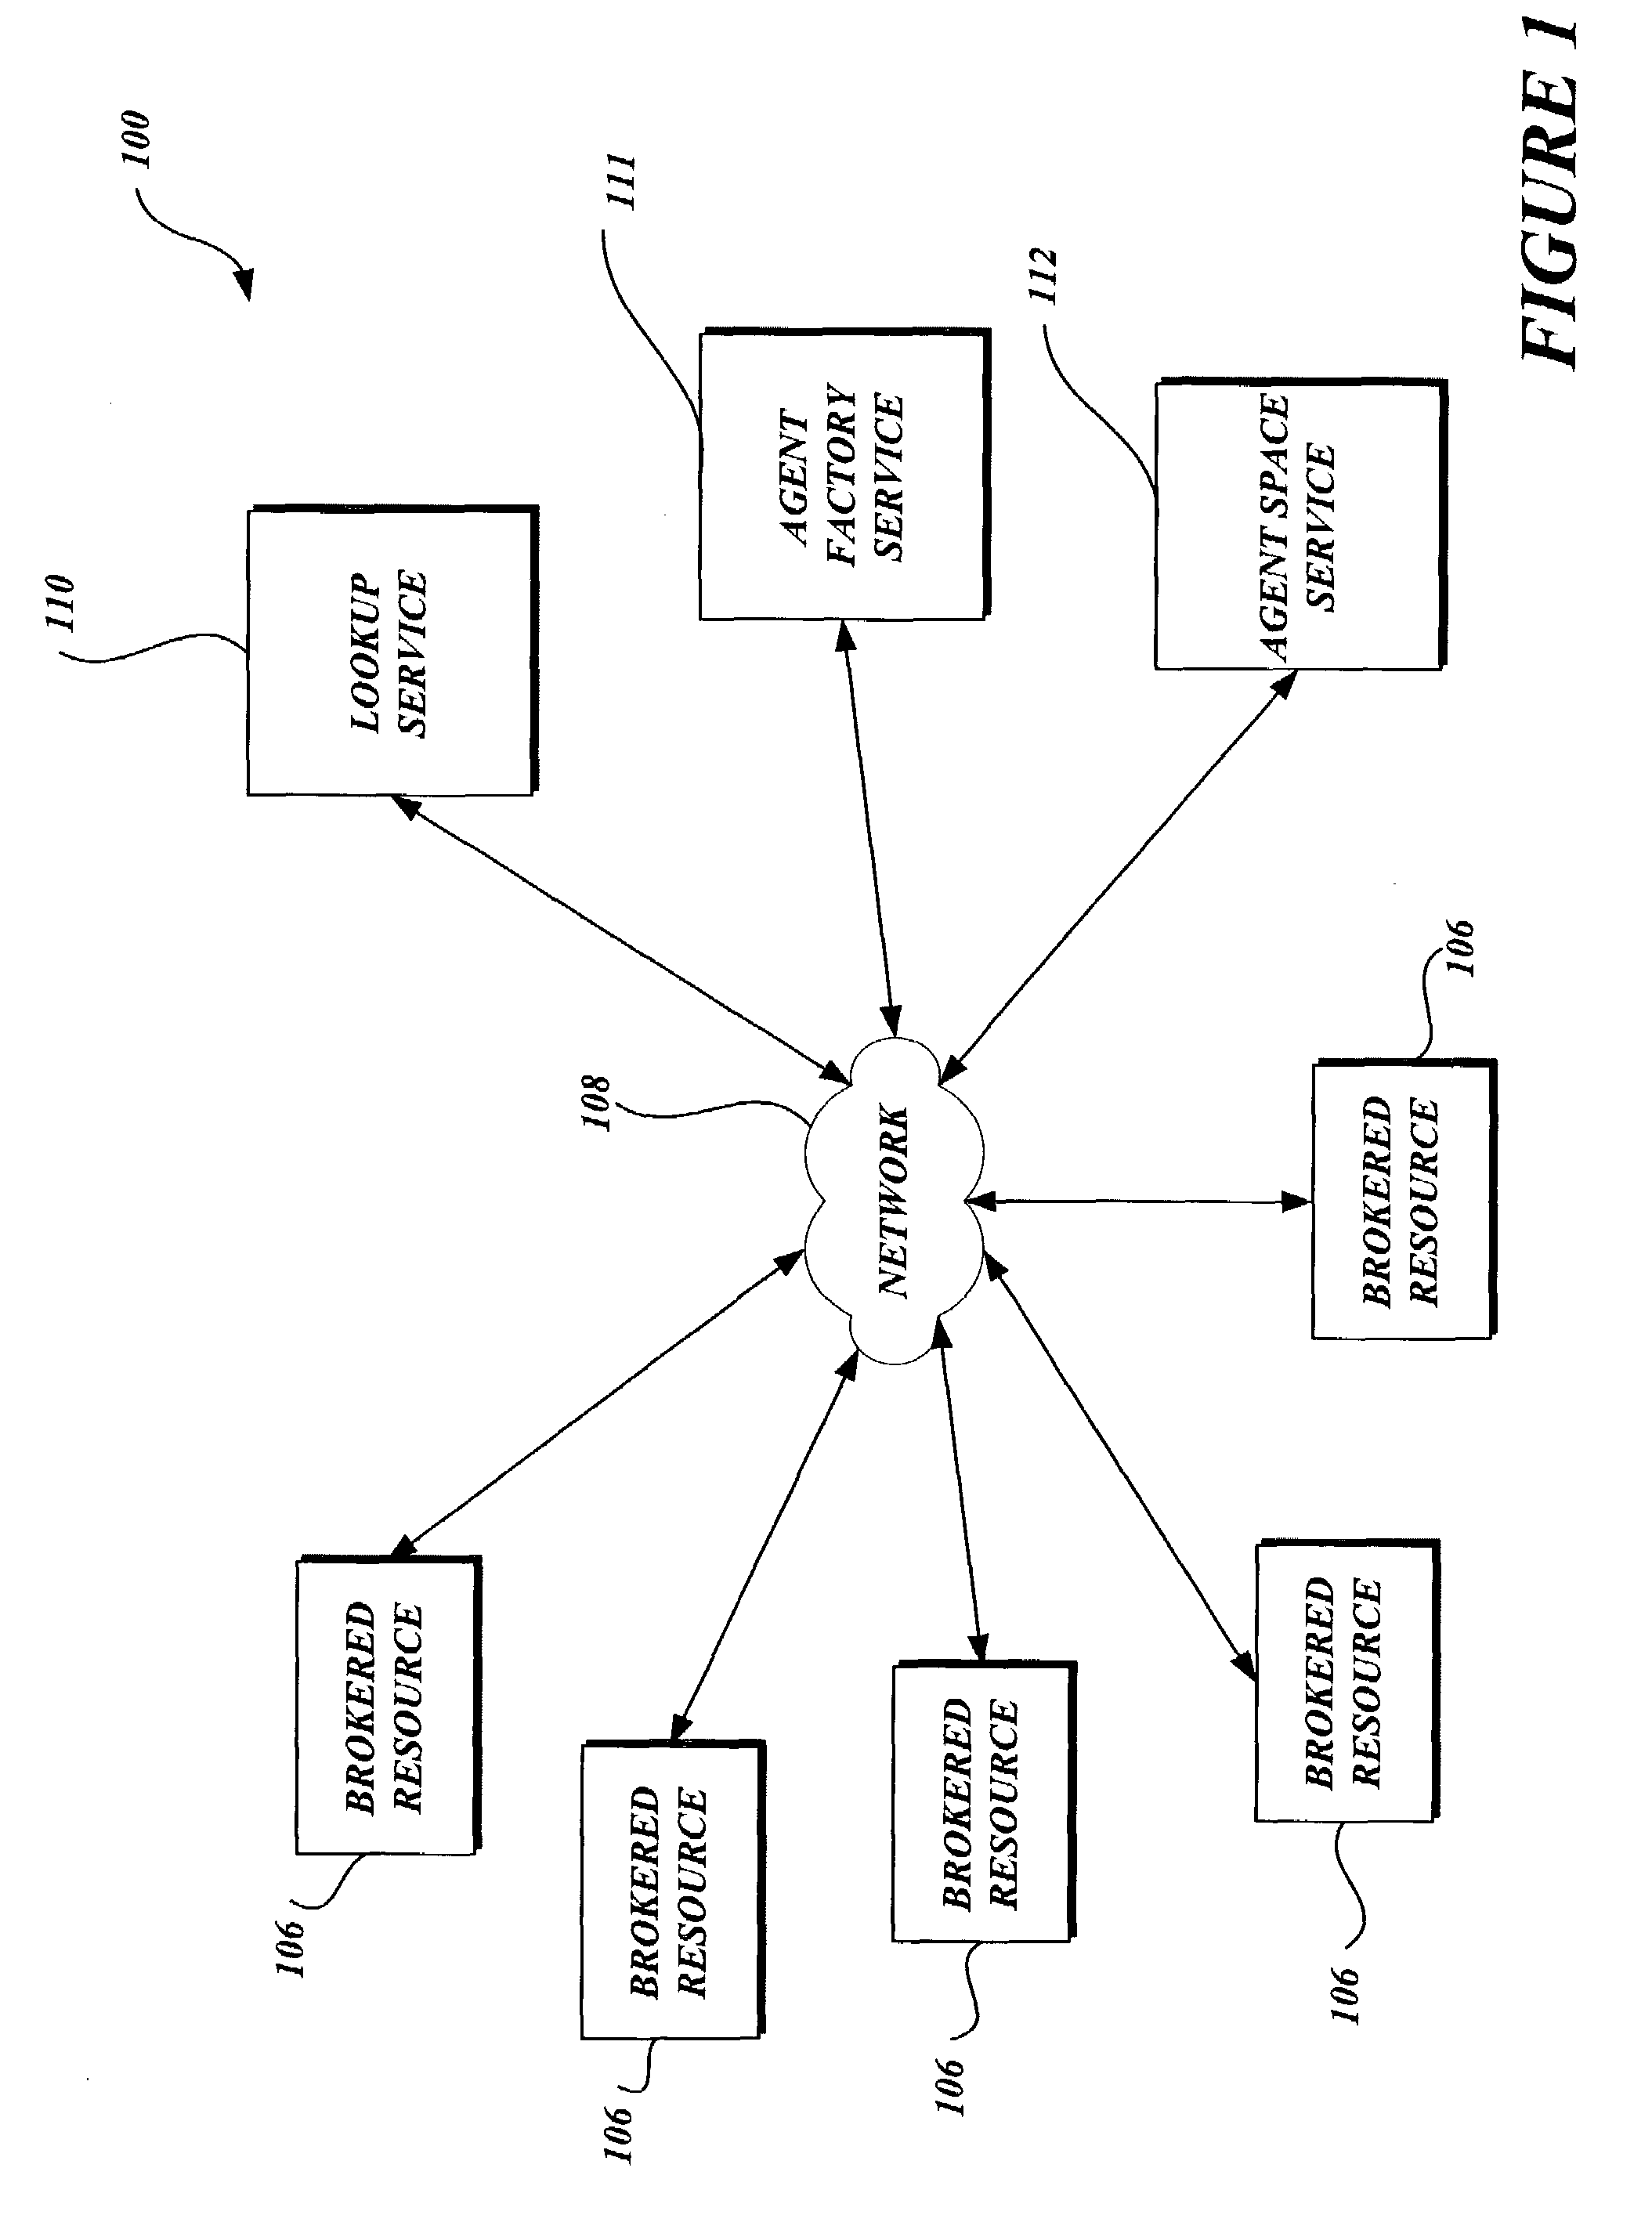 System and method for managing distributed computer processes